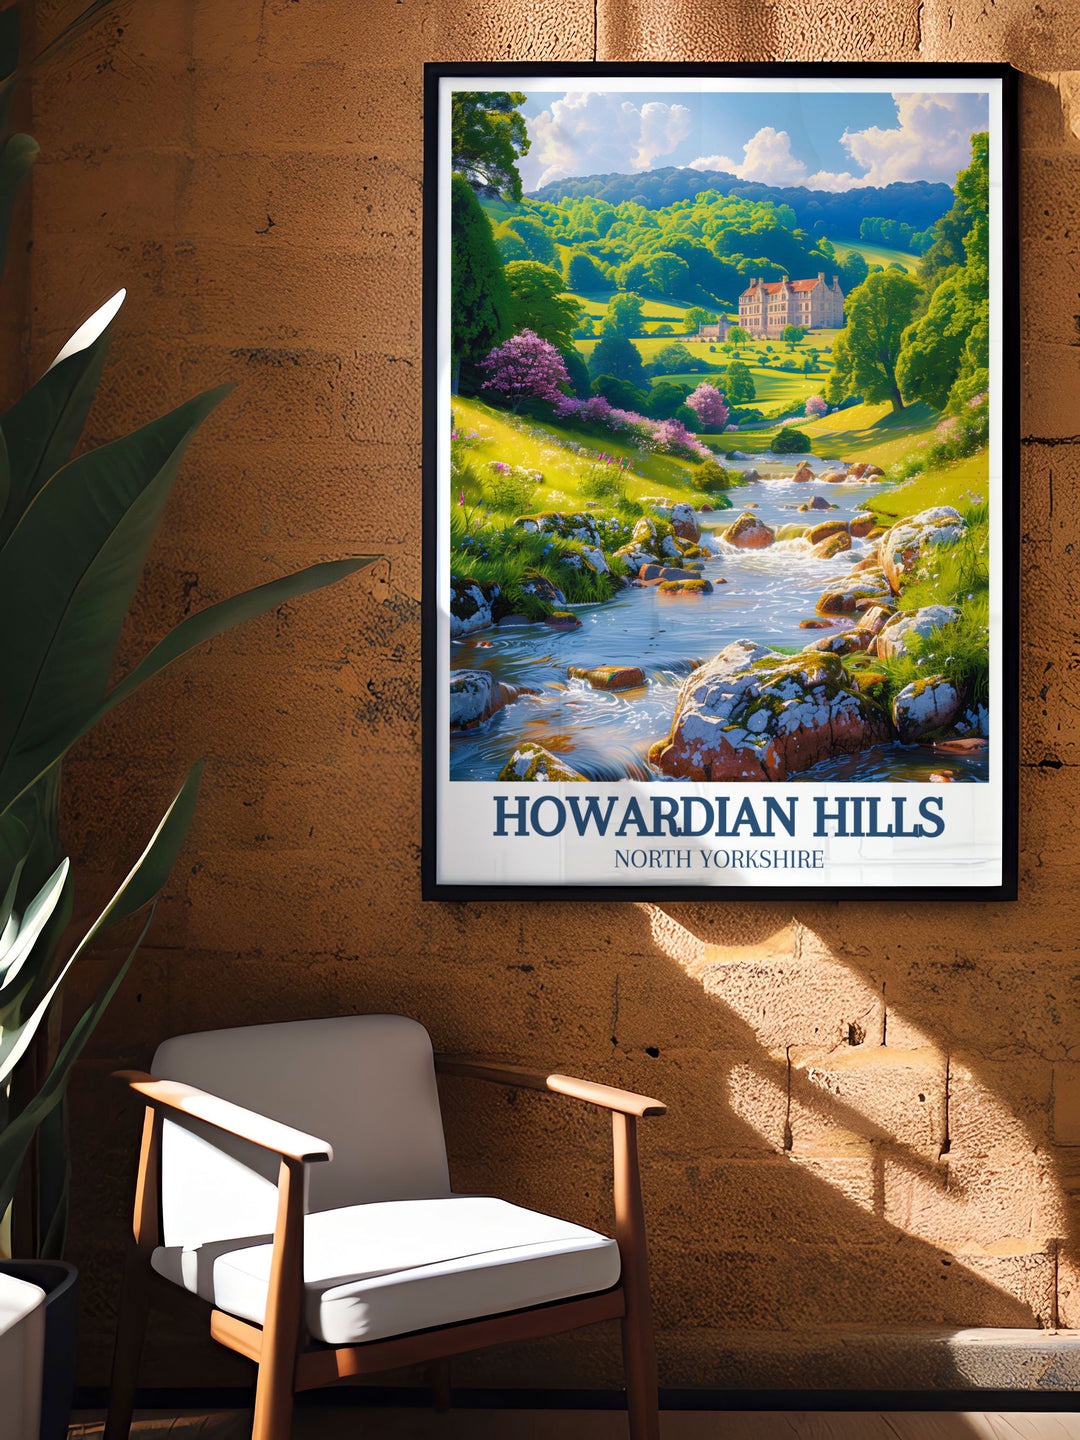 Home decor featuring Nunnington Hall, a picturesque manor house in the Howardian Hills. This print highlights the elegant architecture and beautifully landscaped gardens, making it a stunning addition to any room.